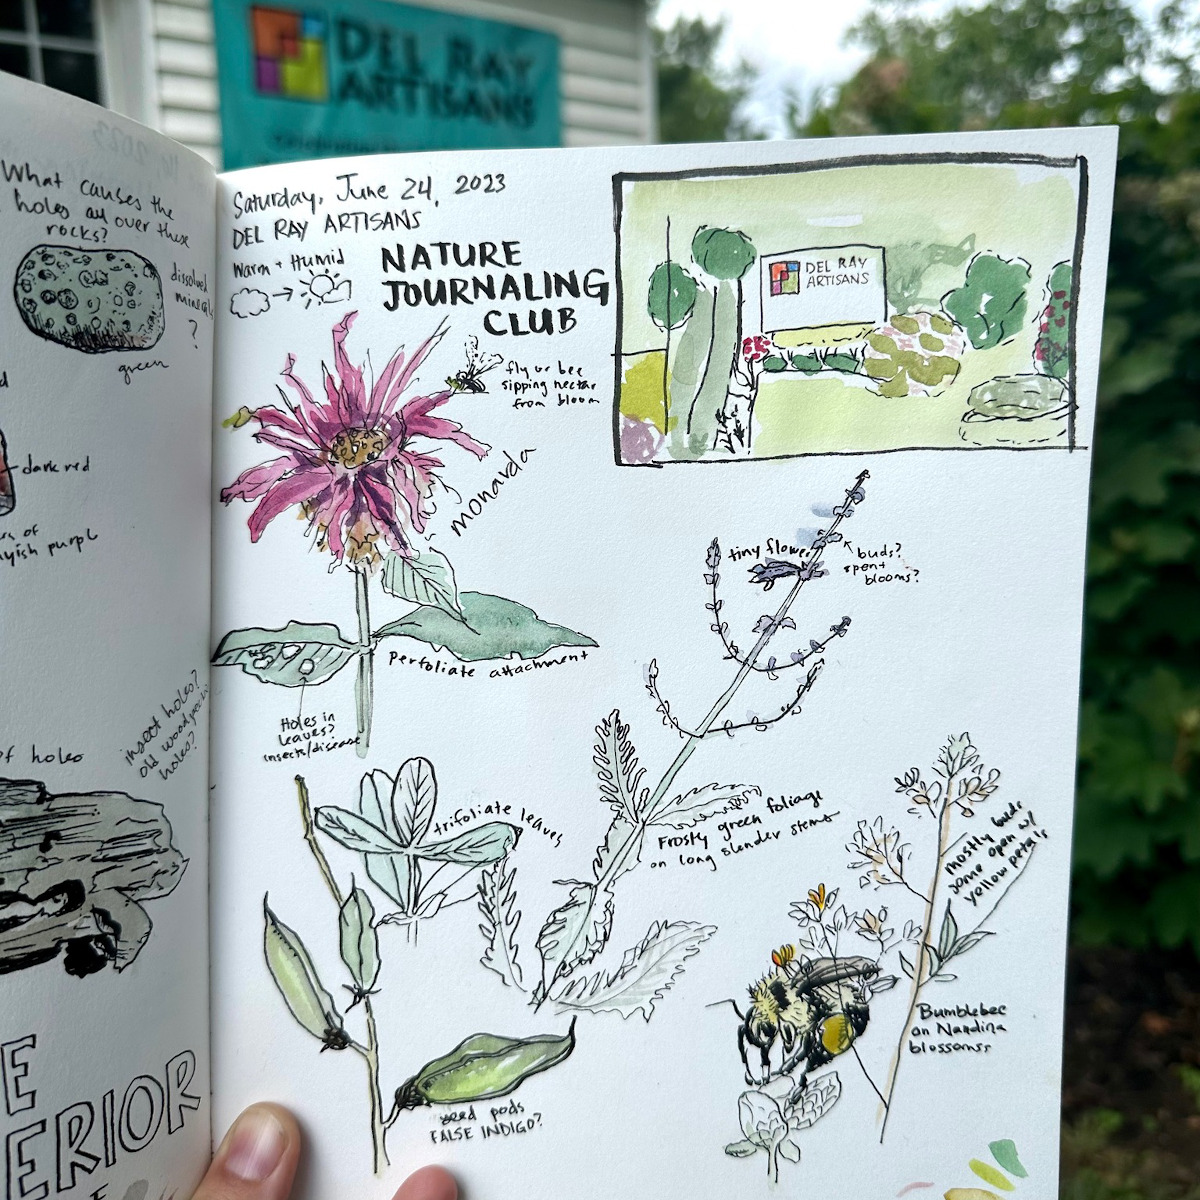 Nature Journaling Club - drawing by Meredith D’Amore